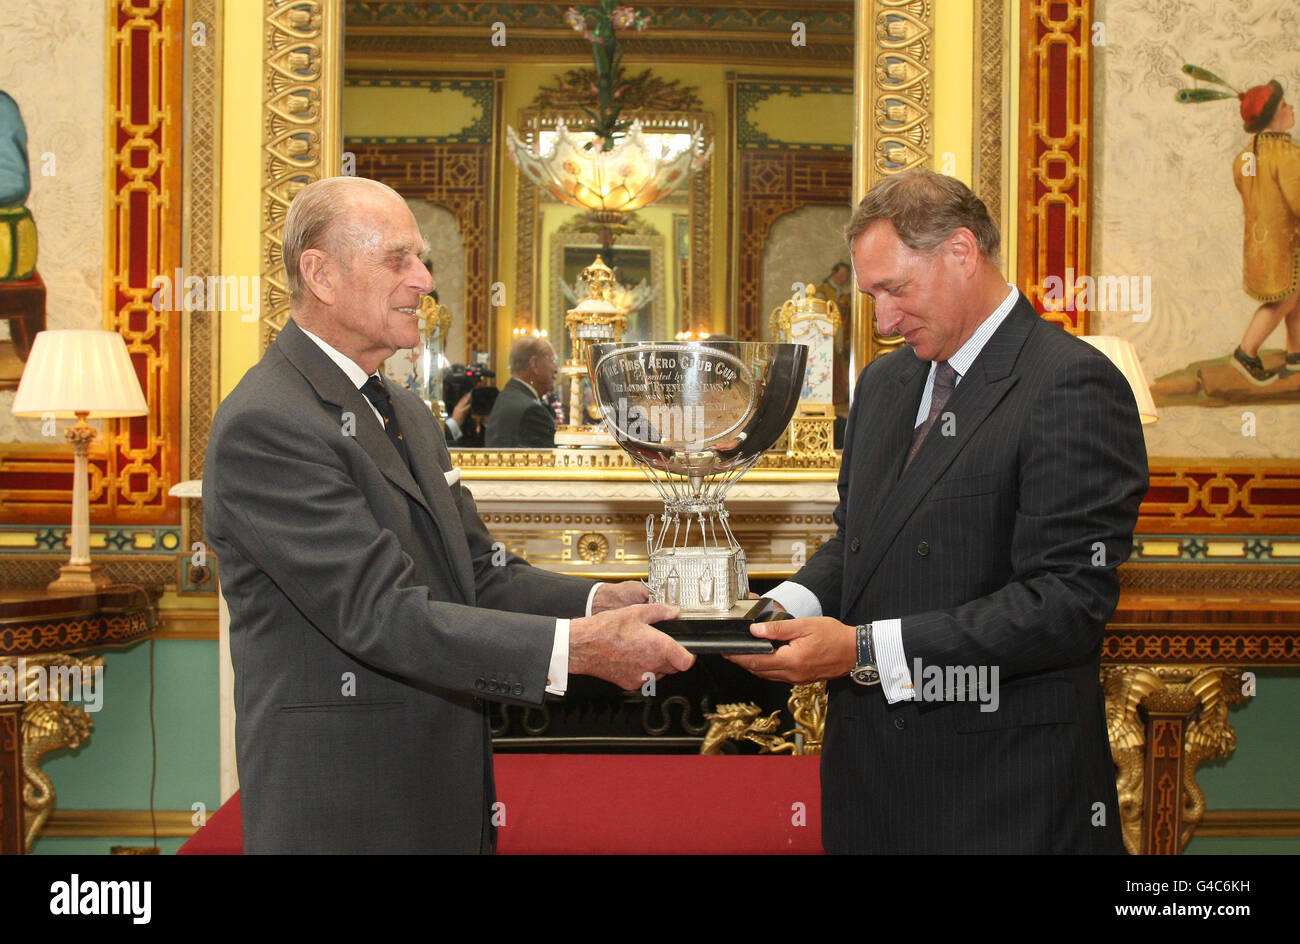 The Duke of Edinburgh presents the Aero Club Cup to David Hempleman-Adams, at a reception at Buckingham Palace, in central London. Stock Photo